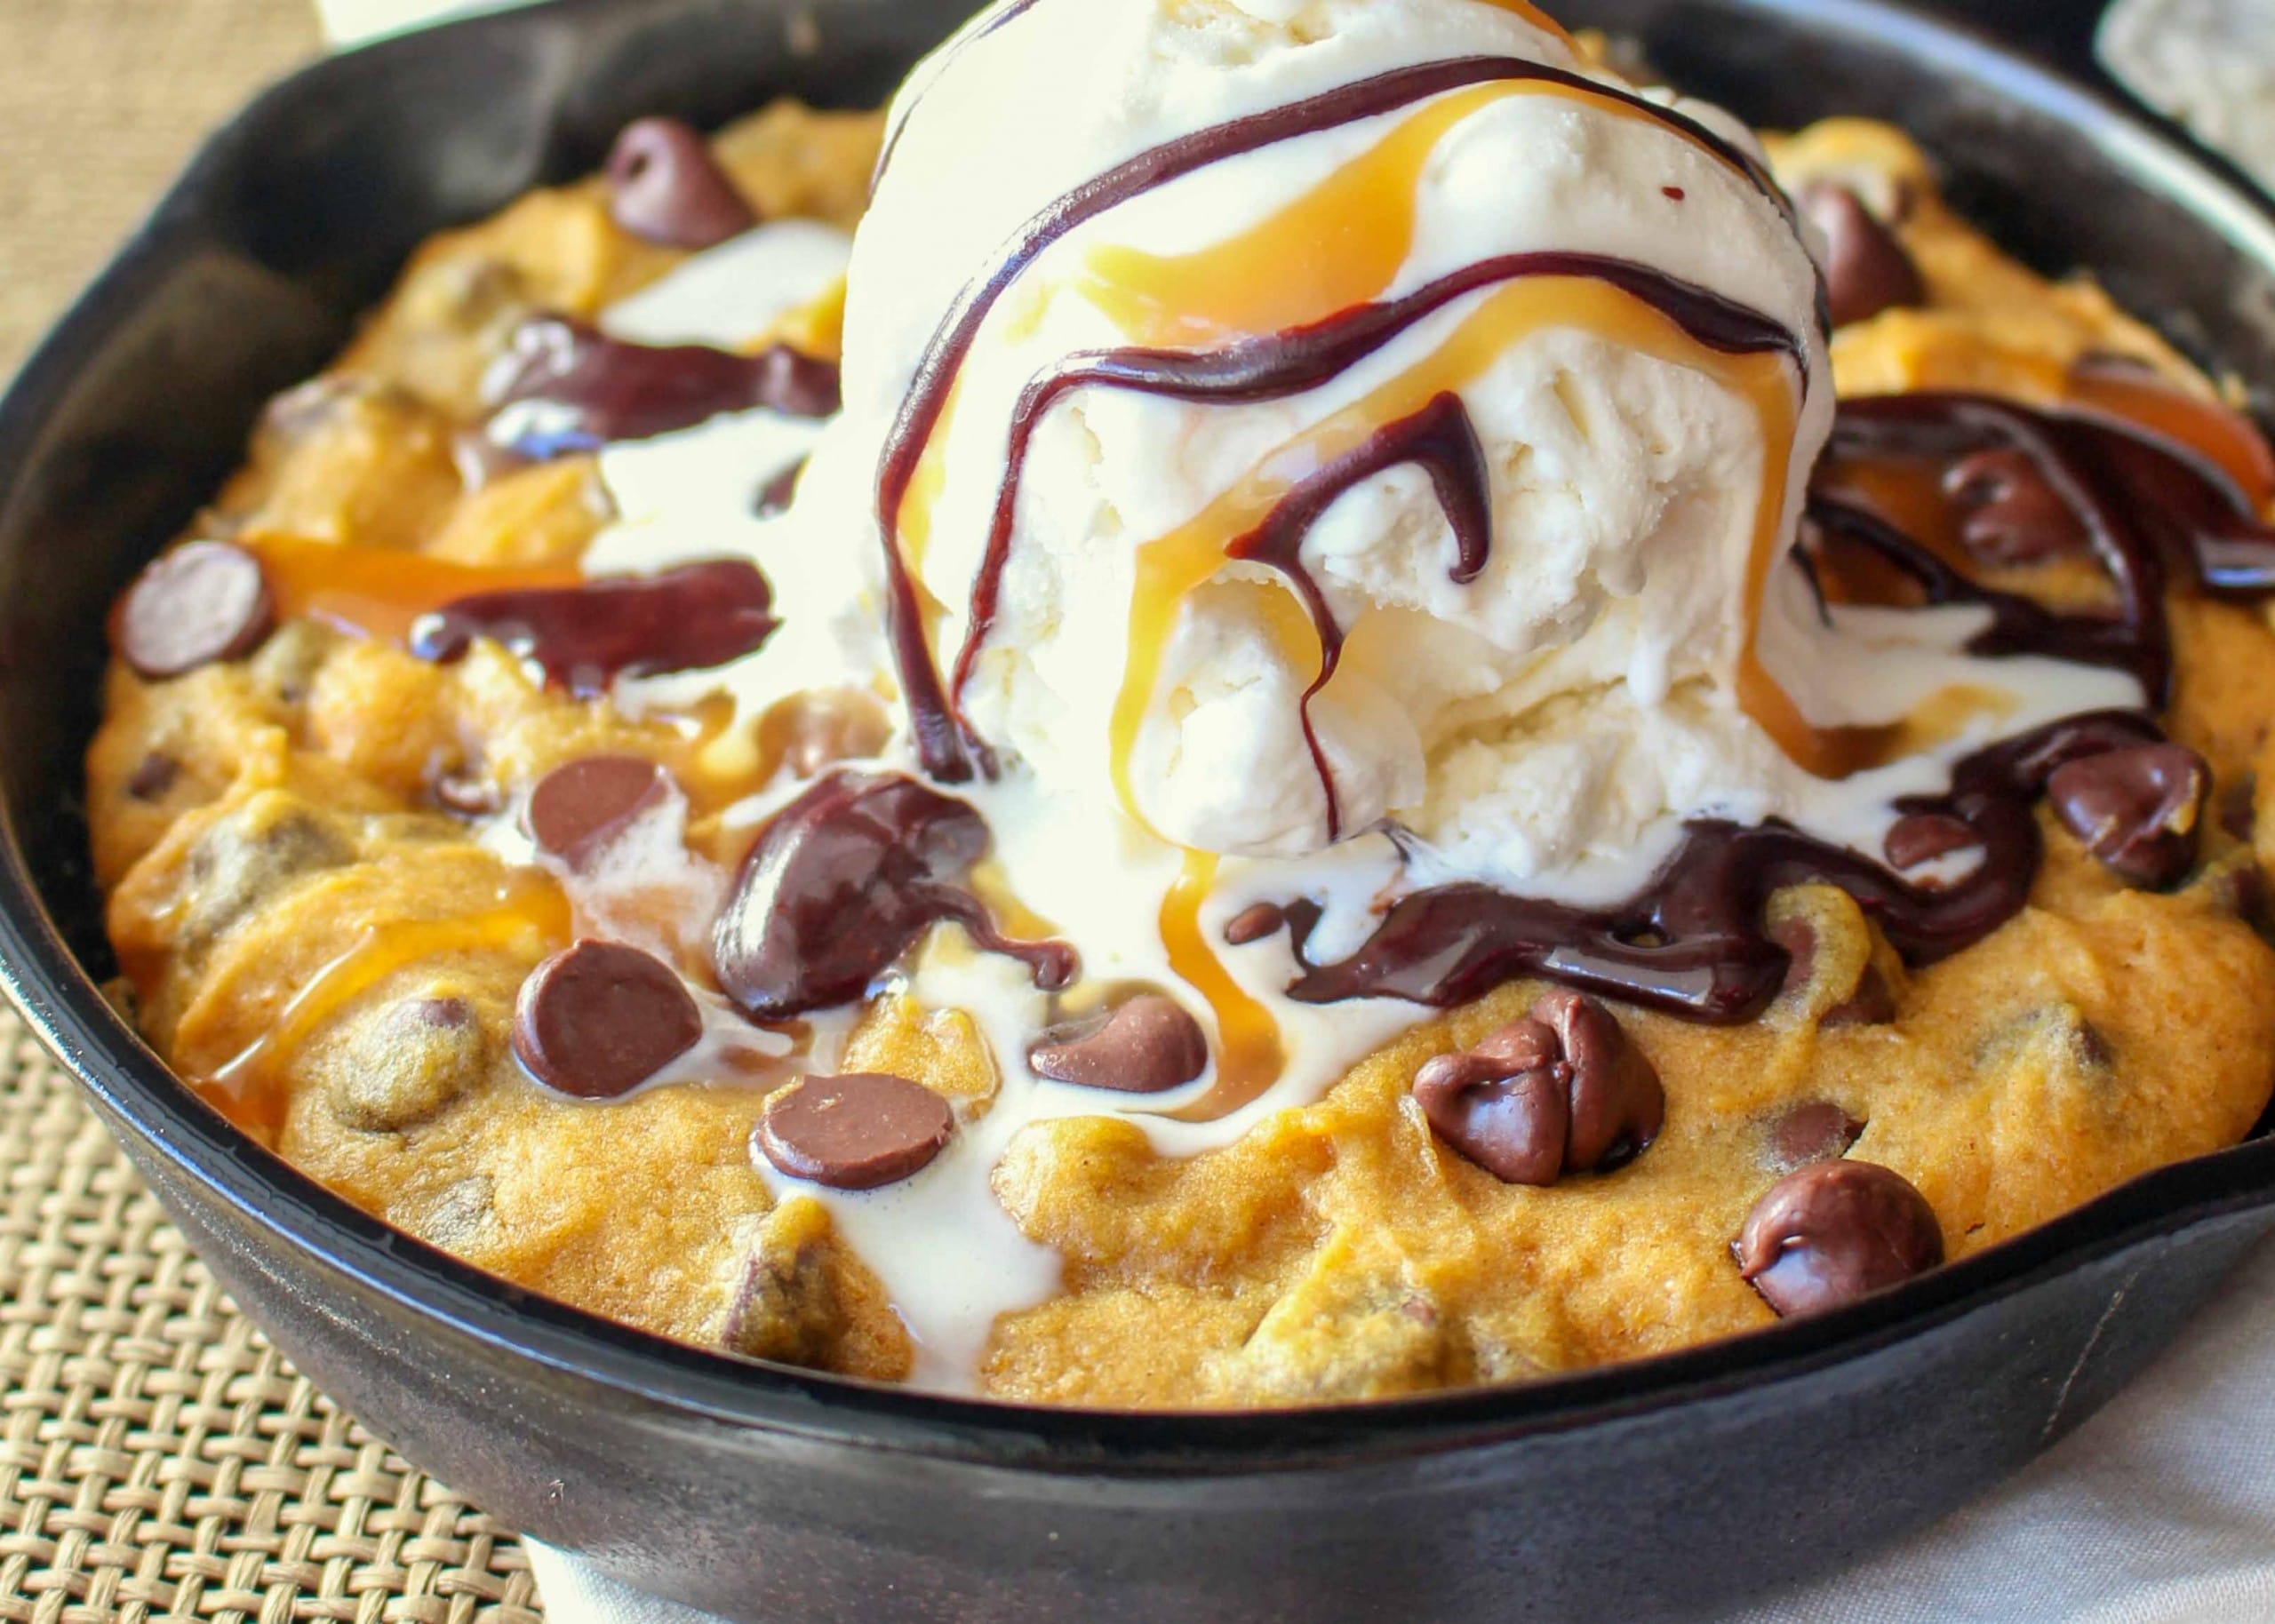 https://chocolatewithgrace.com/wp-content/uploads/2014/11/CWG-Pumpkin-Skillet-Cookie-4-1-of-1-scaled.jpg